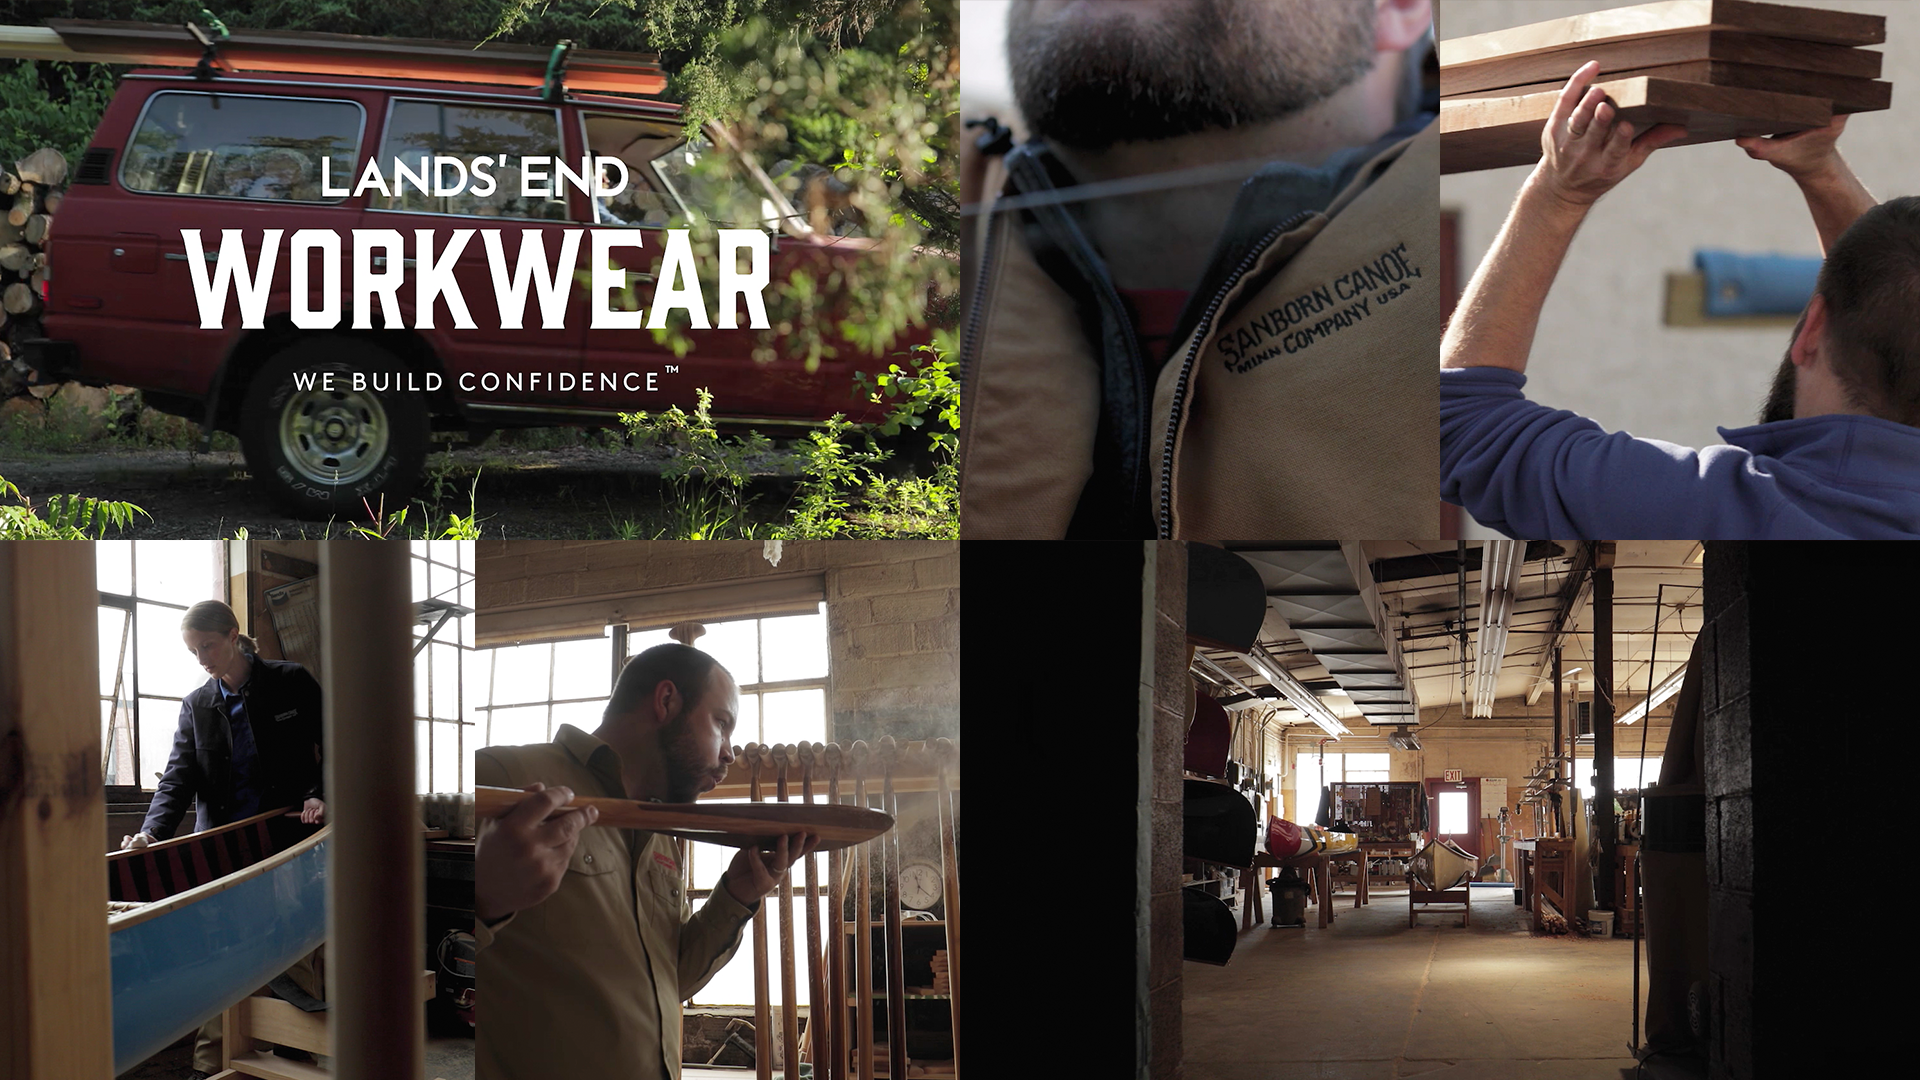 A collage of images from the Lands End Workwear video, featuring a closeup of a coat, a worker crafting a canoe paddle, workers lifting lumber and canoes, and a vehicle driving past trees.